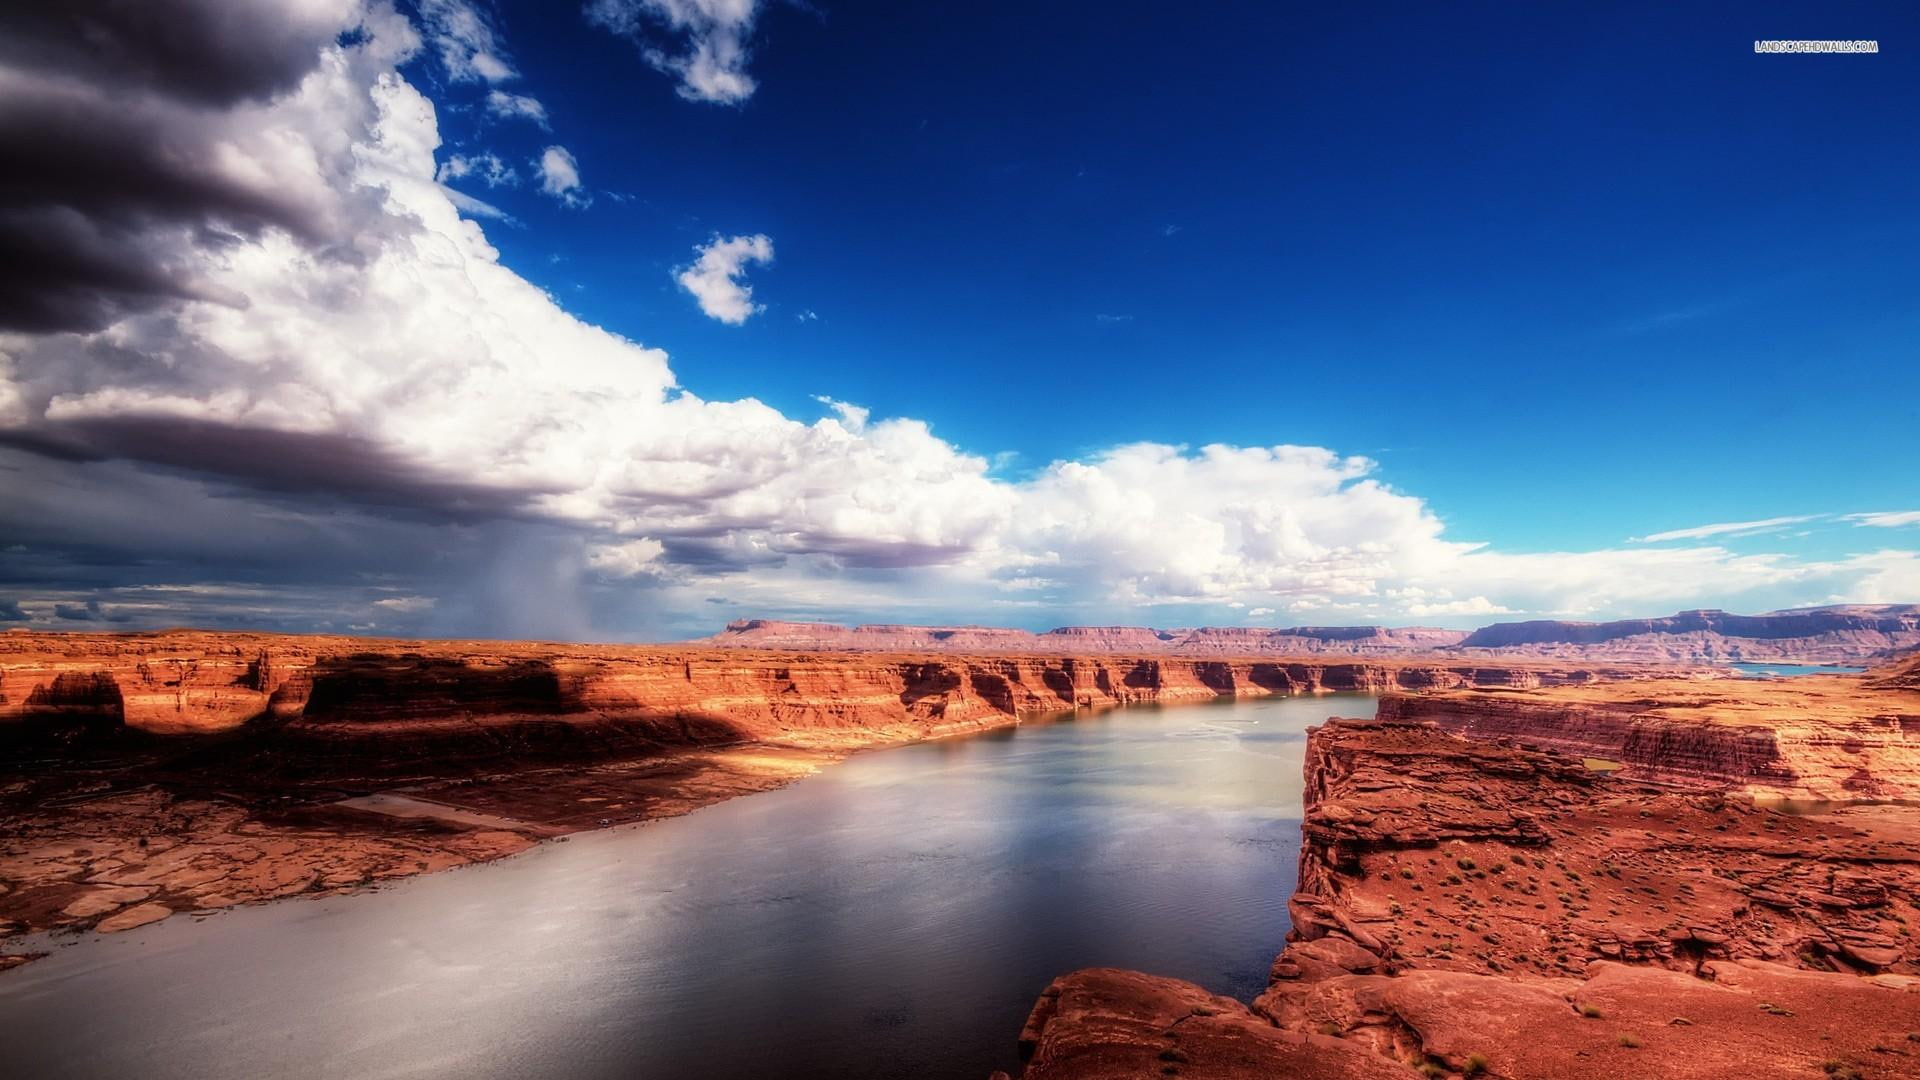 Great Desert River, cliffs, clouds, nature and landscapes